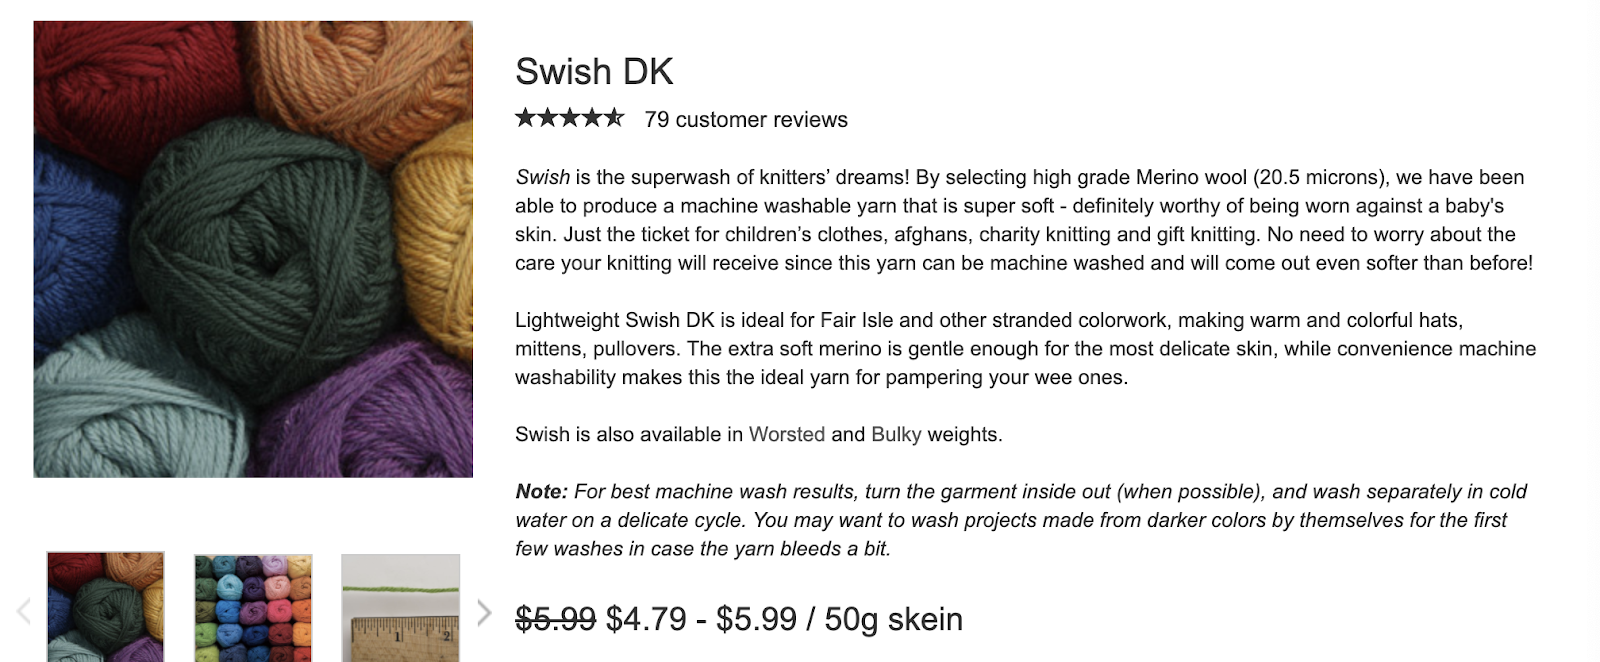 A screenshot of Knitpick's Swish DK as a product description template example.